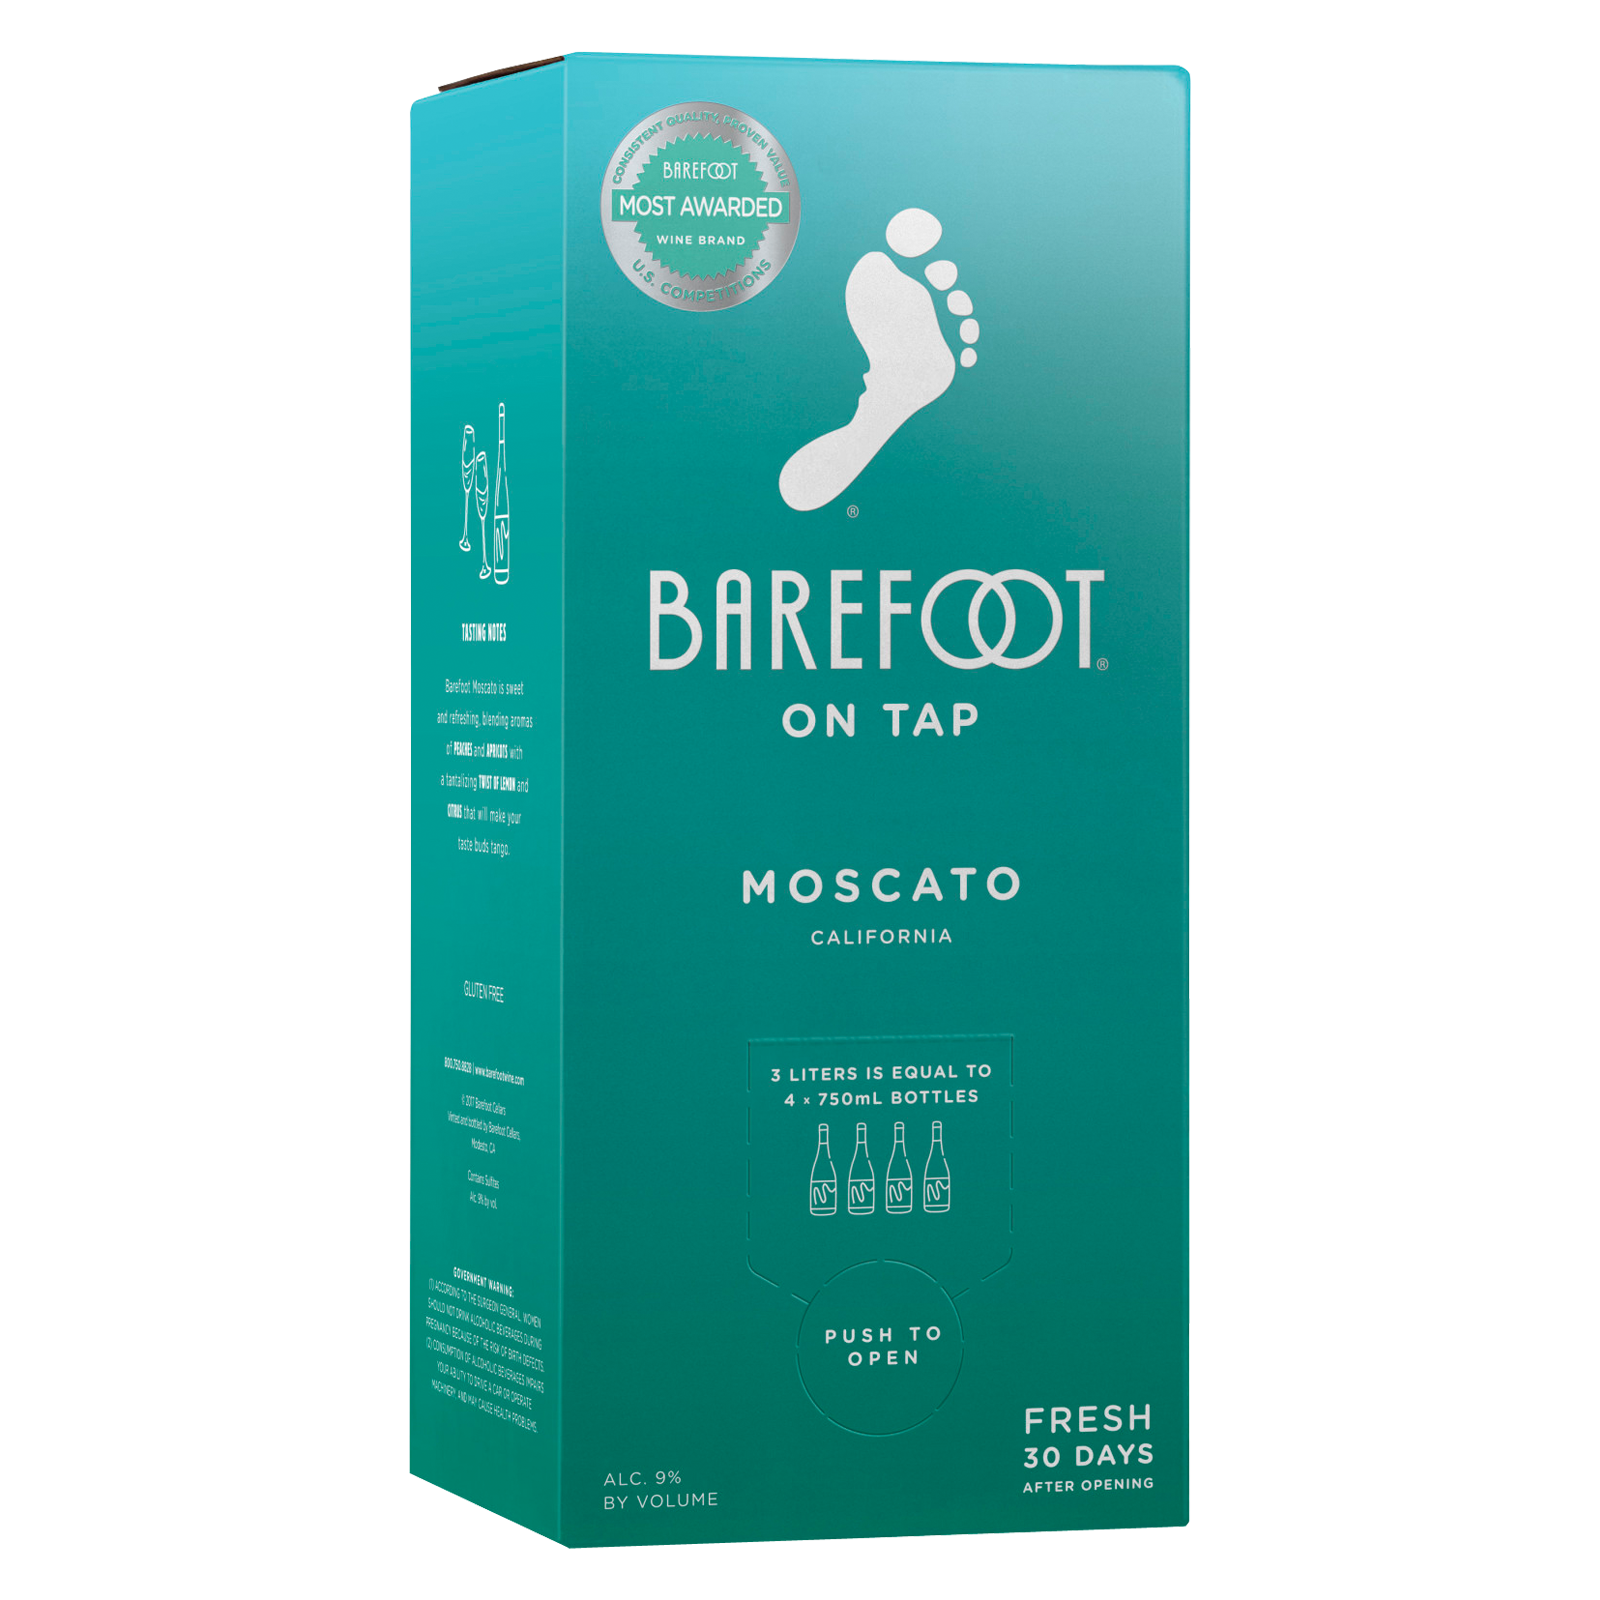 Barefoot On Tap Moscato 3 Liter Box